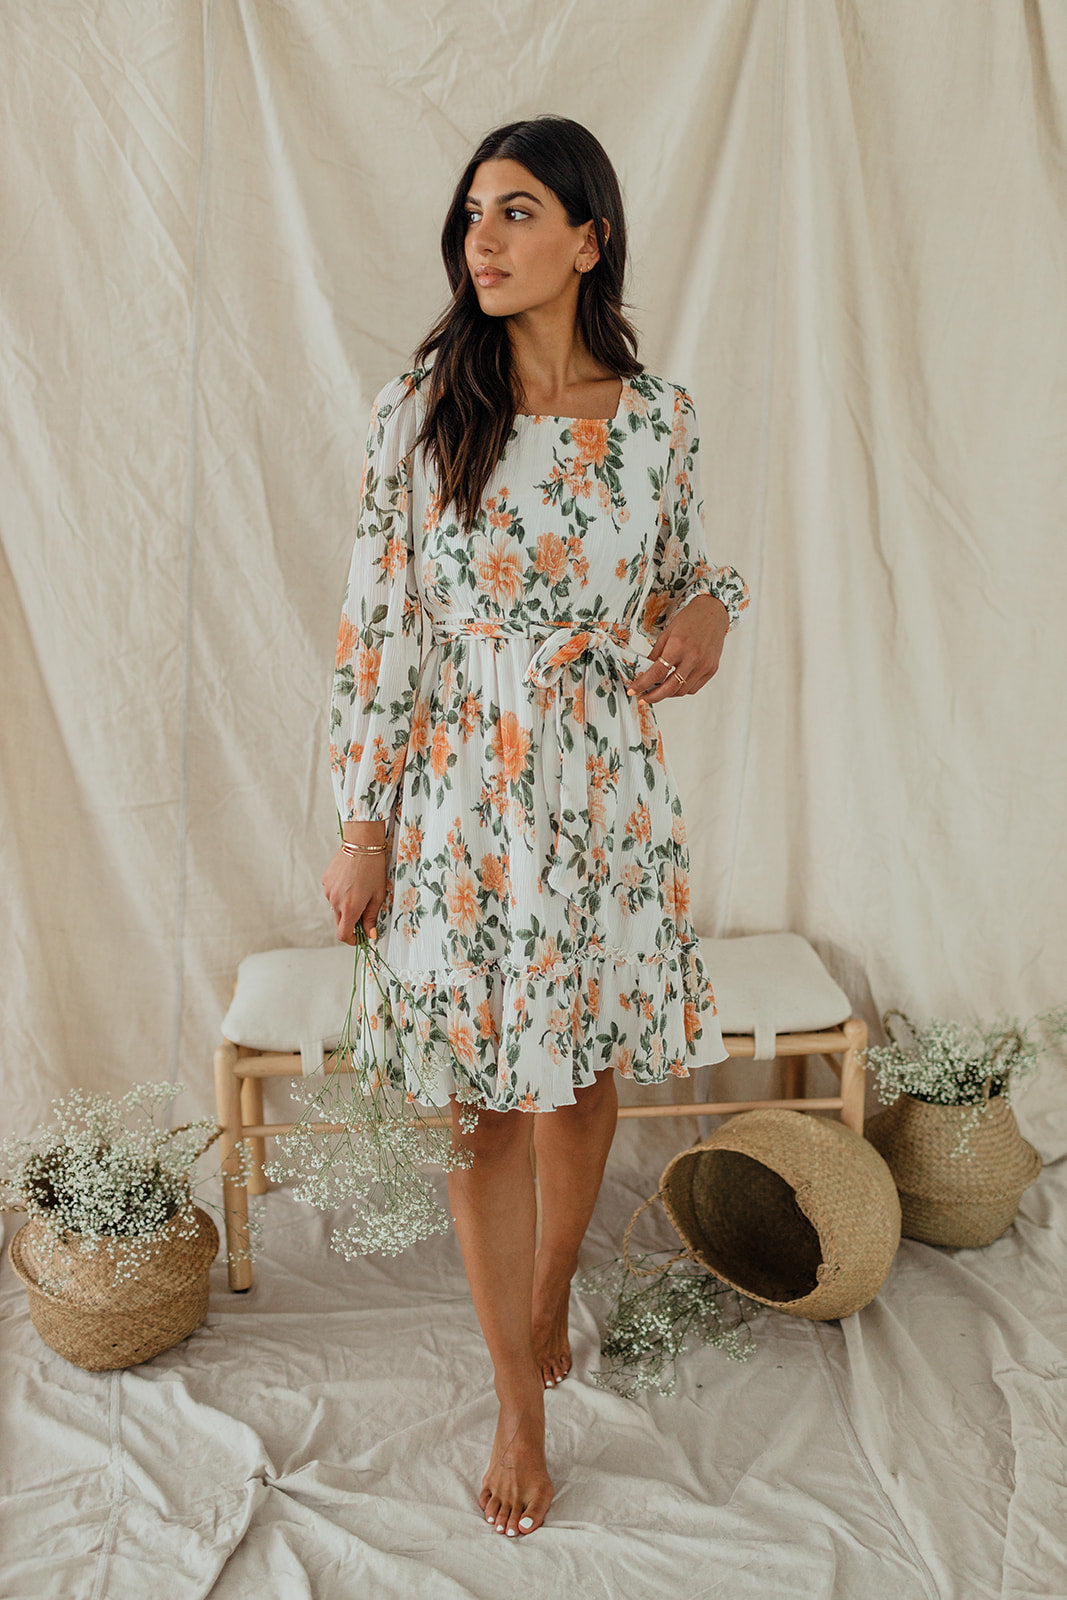 MAMA Off-the-shoulder Dress - Apricot/floral - Ladies